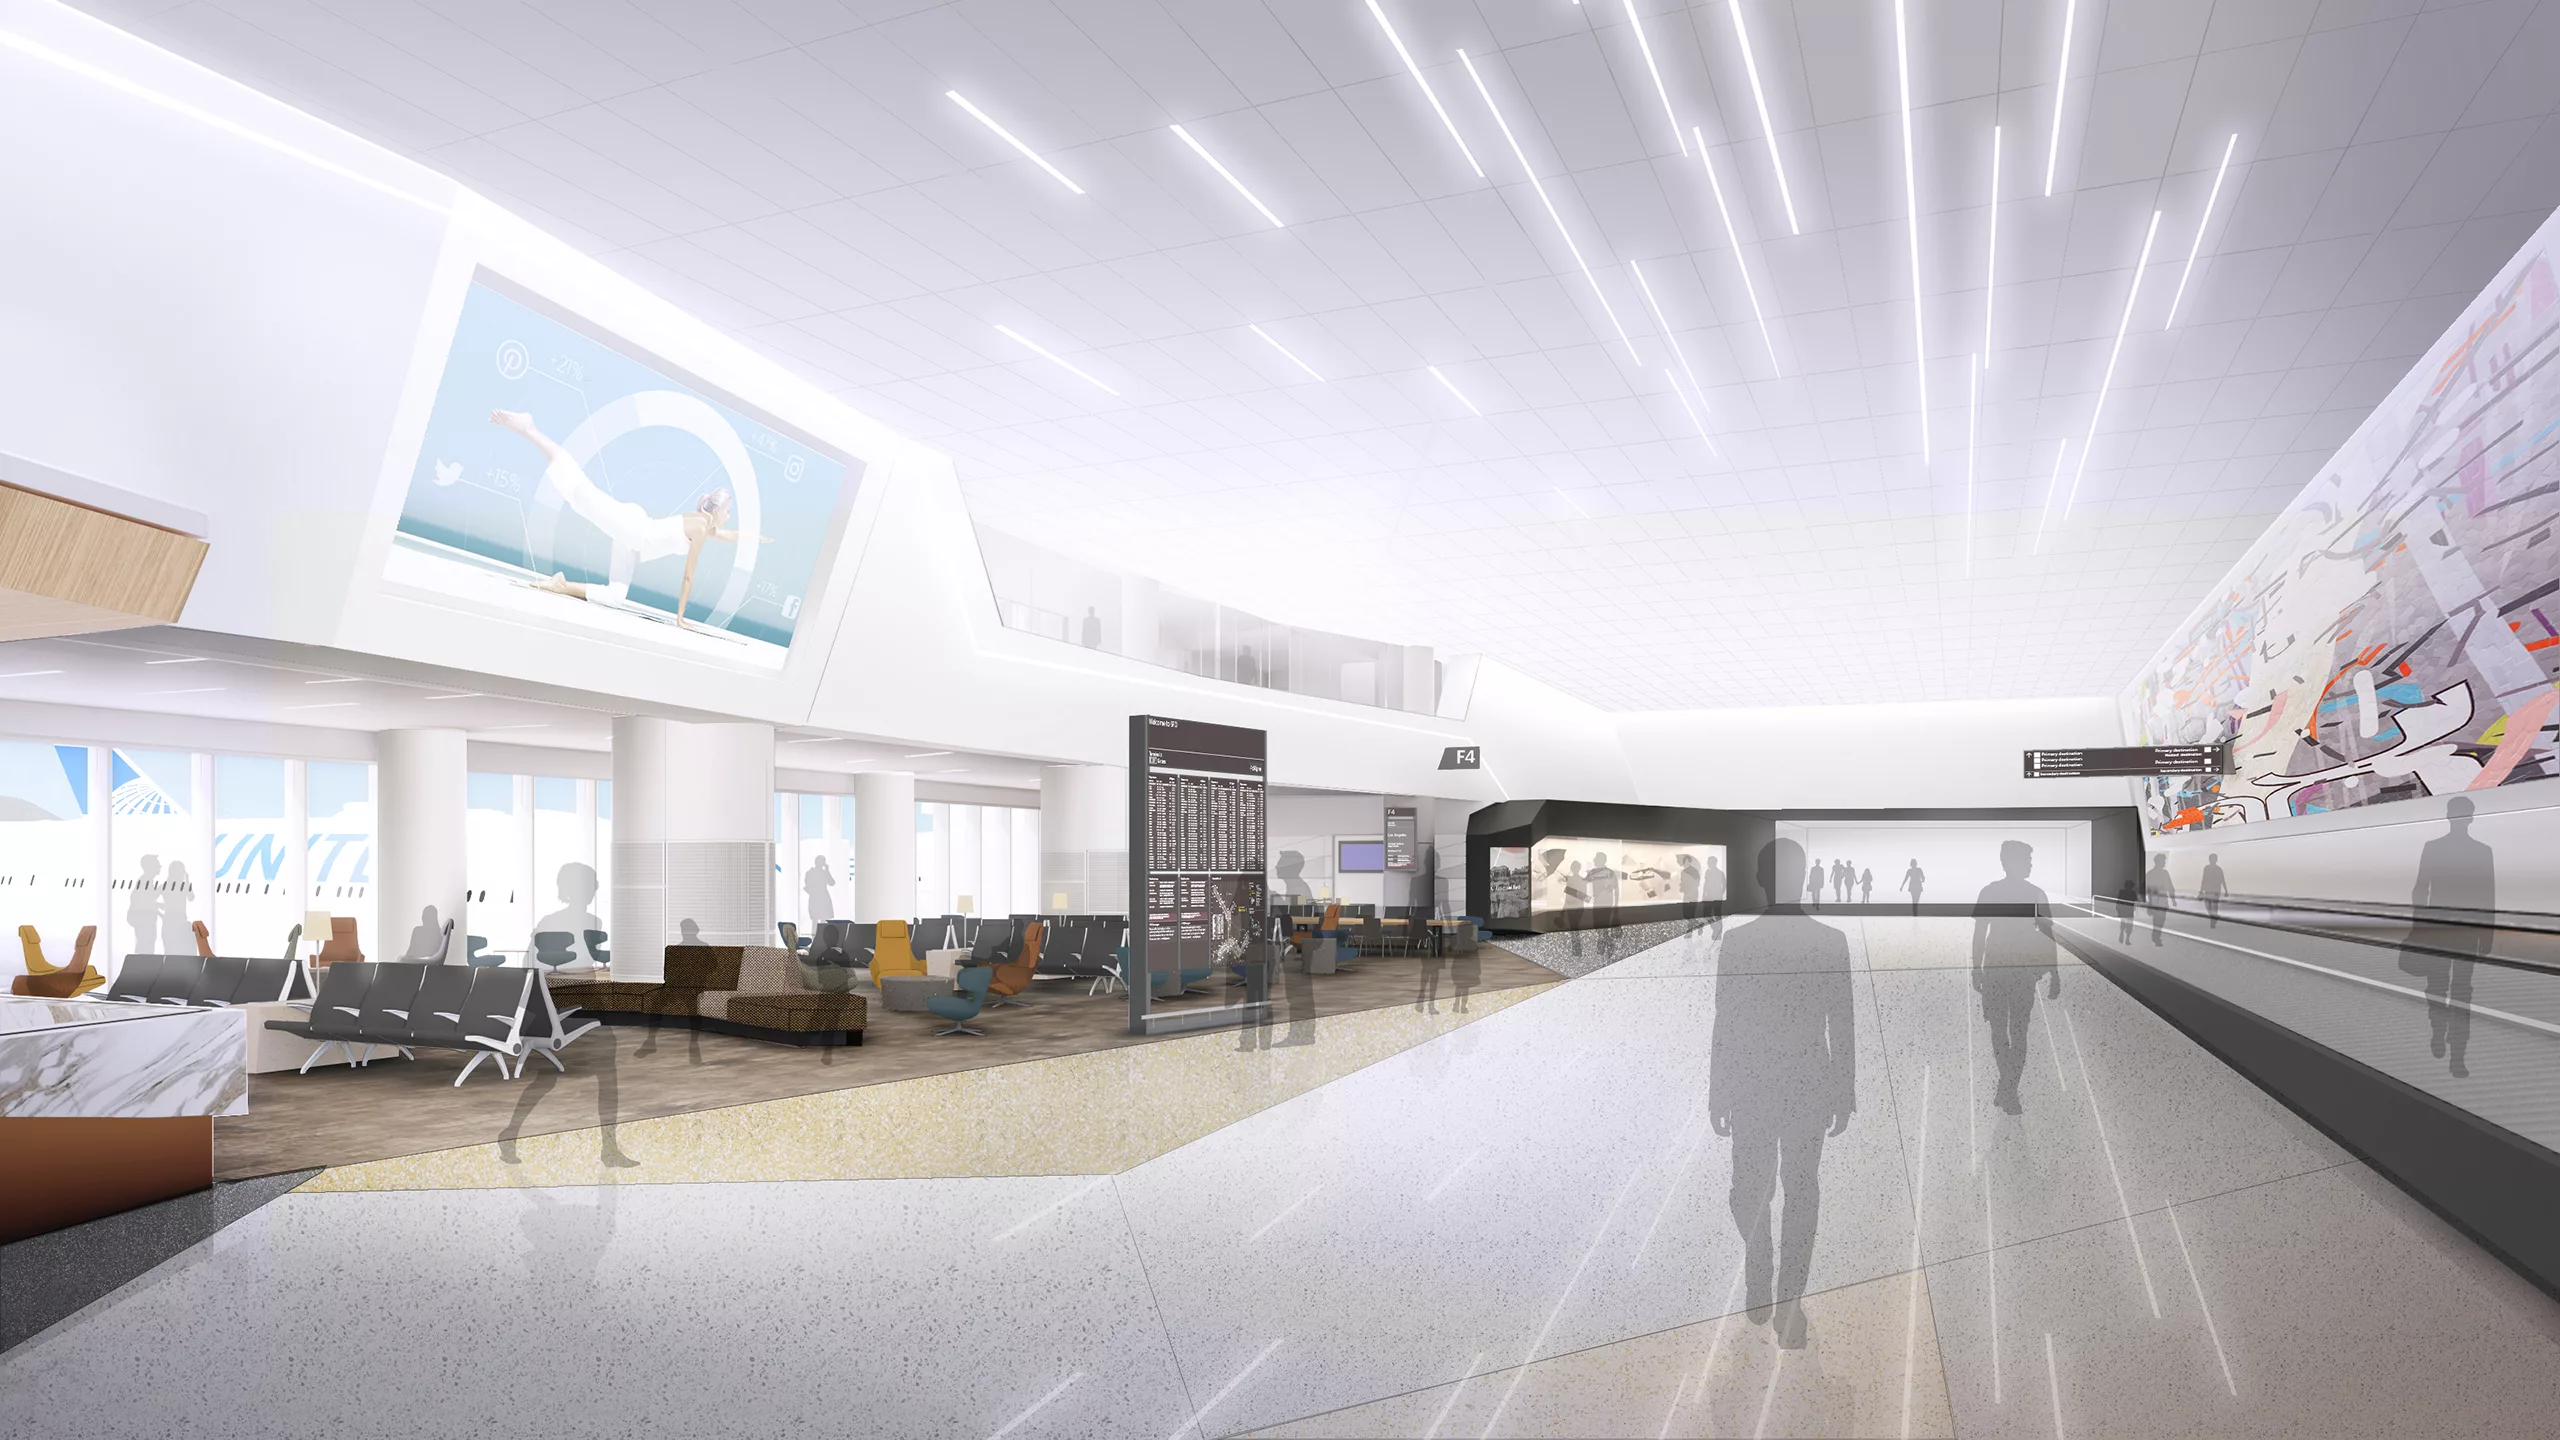 Interior rendering of a moving walkway inside San Francisco International Airport's modernized Terminal 3 West concourse